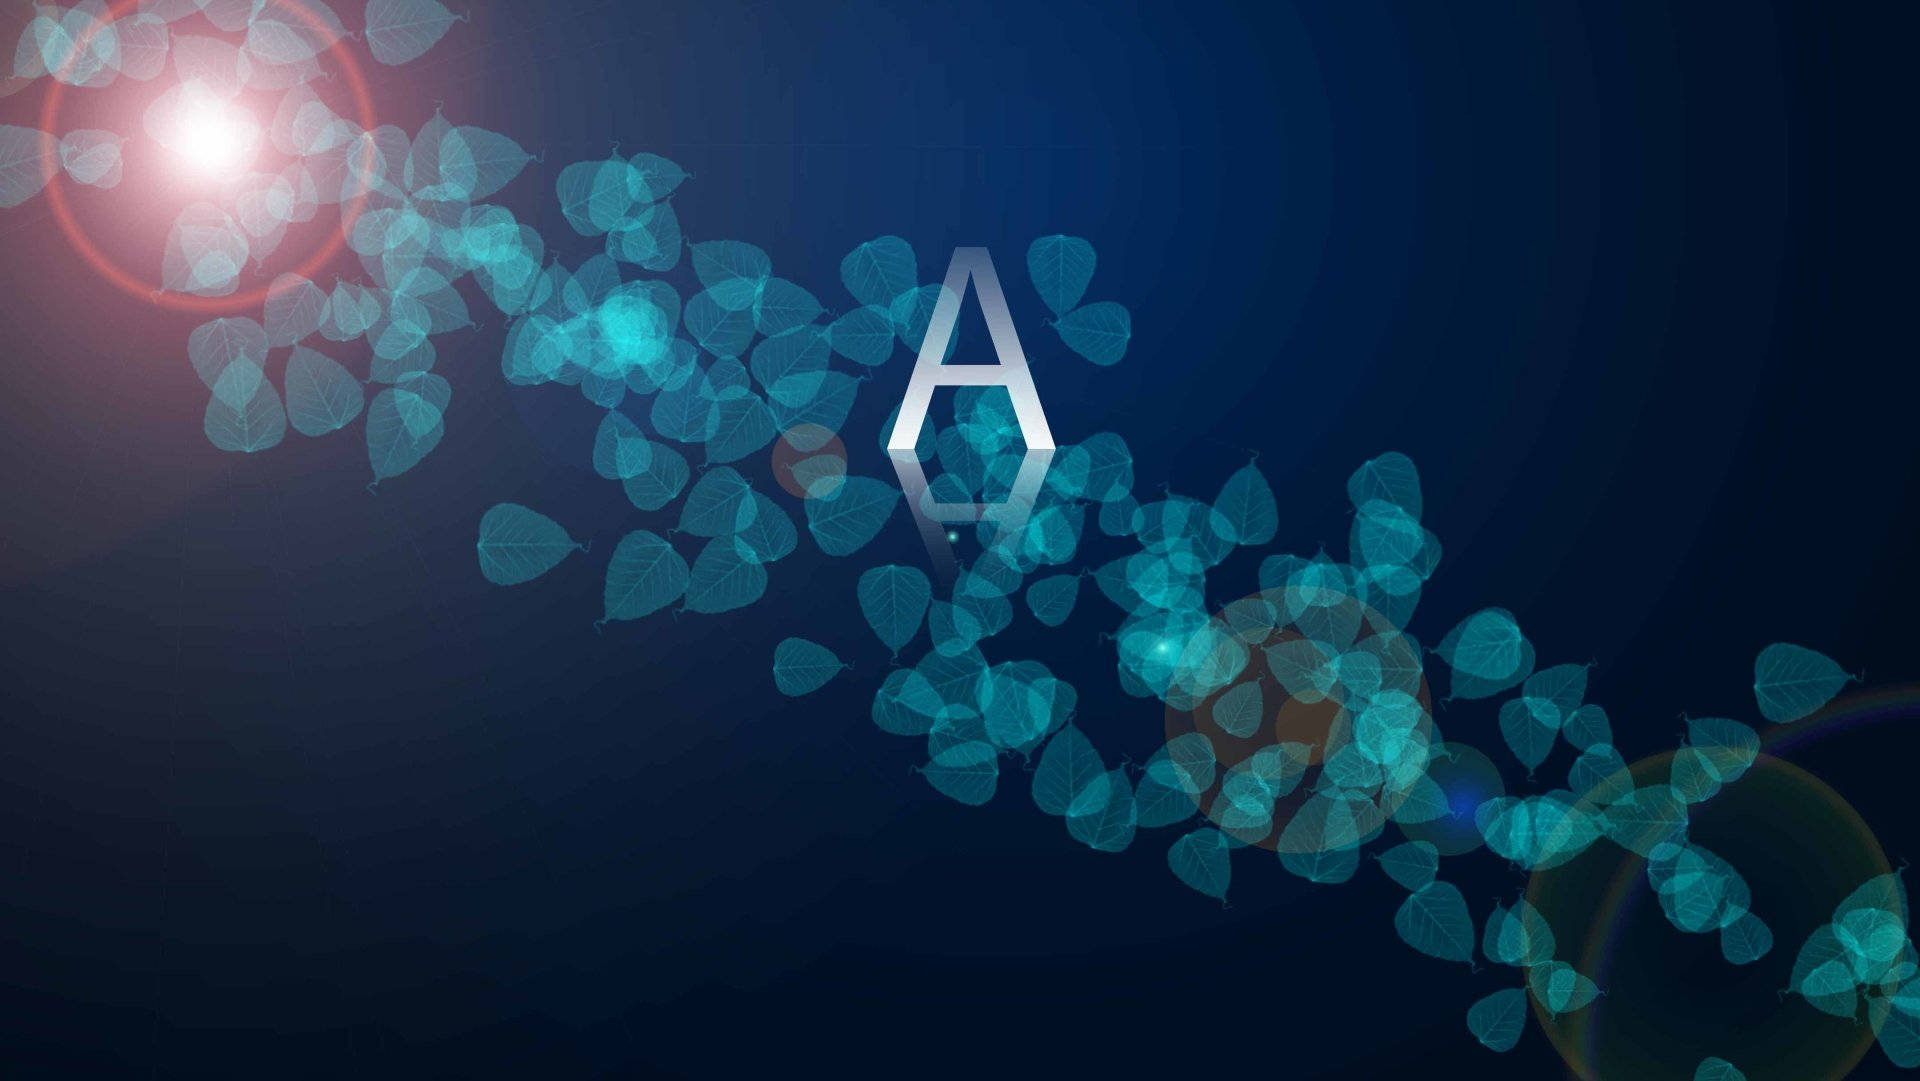 Artistic Representation of Letter A Surrounded by Blue Leaves Wallpaper